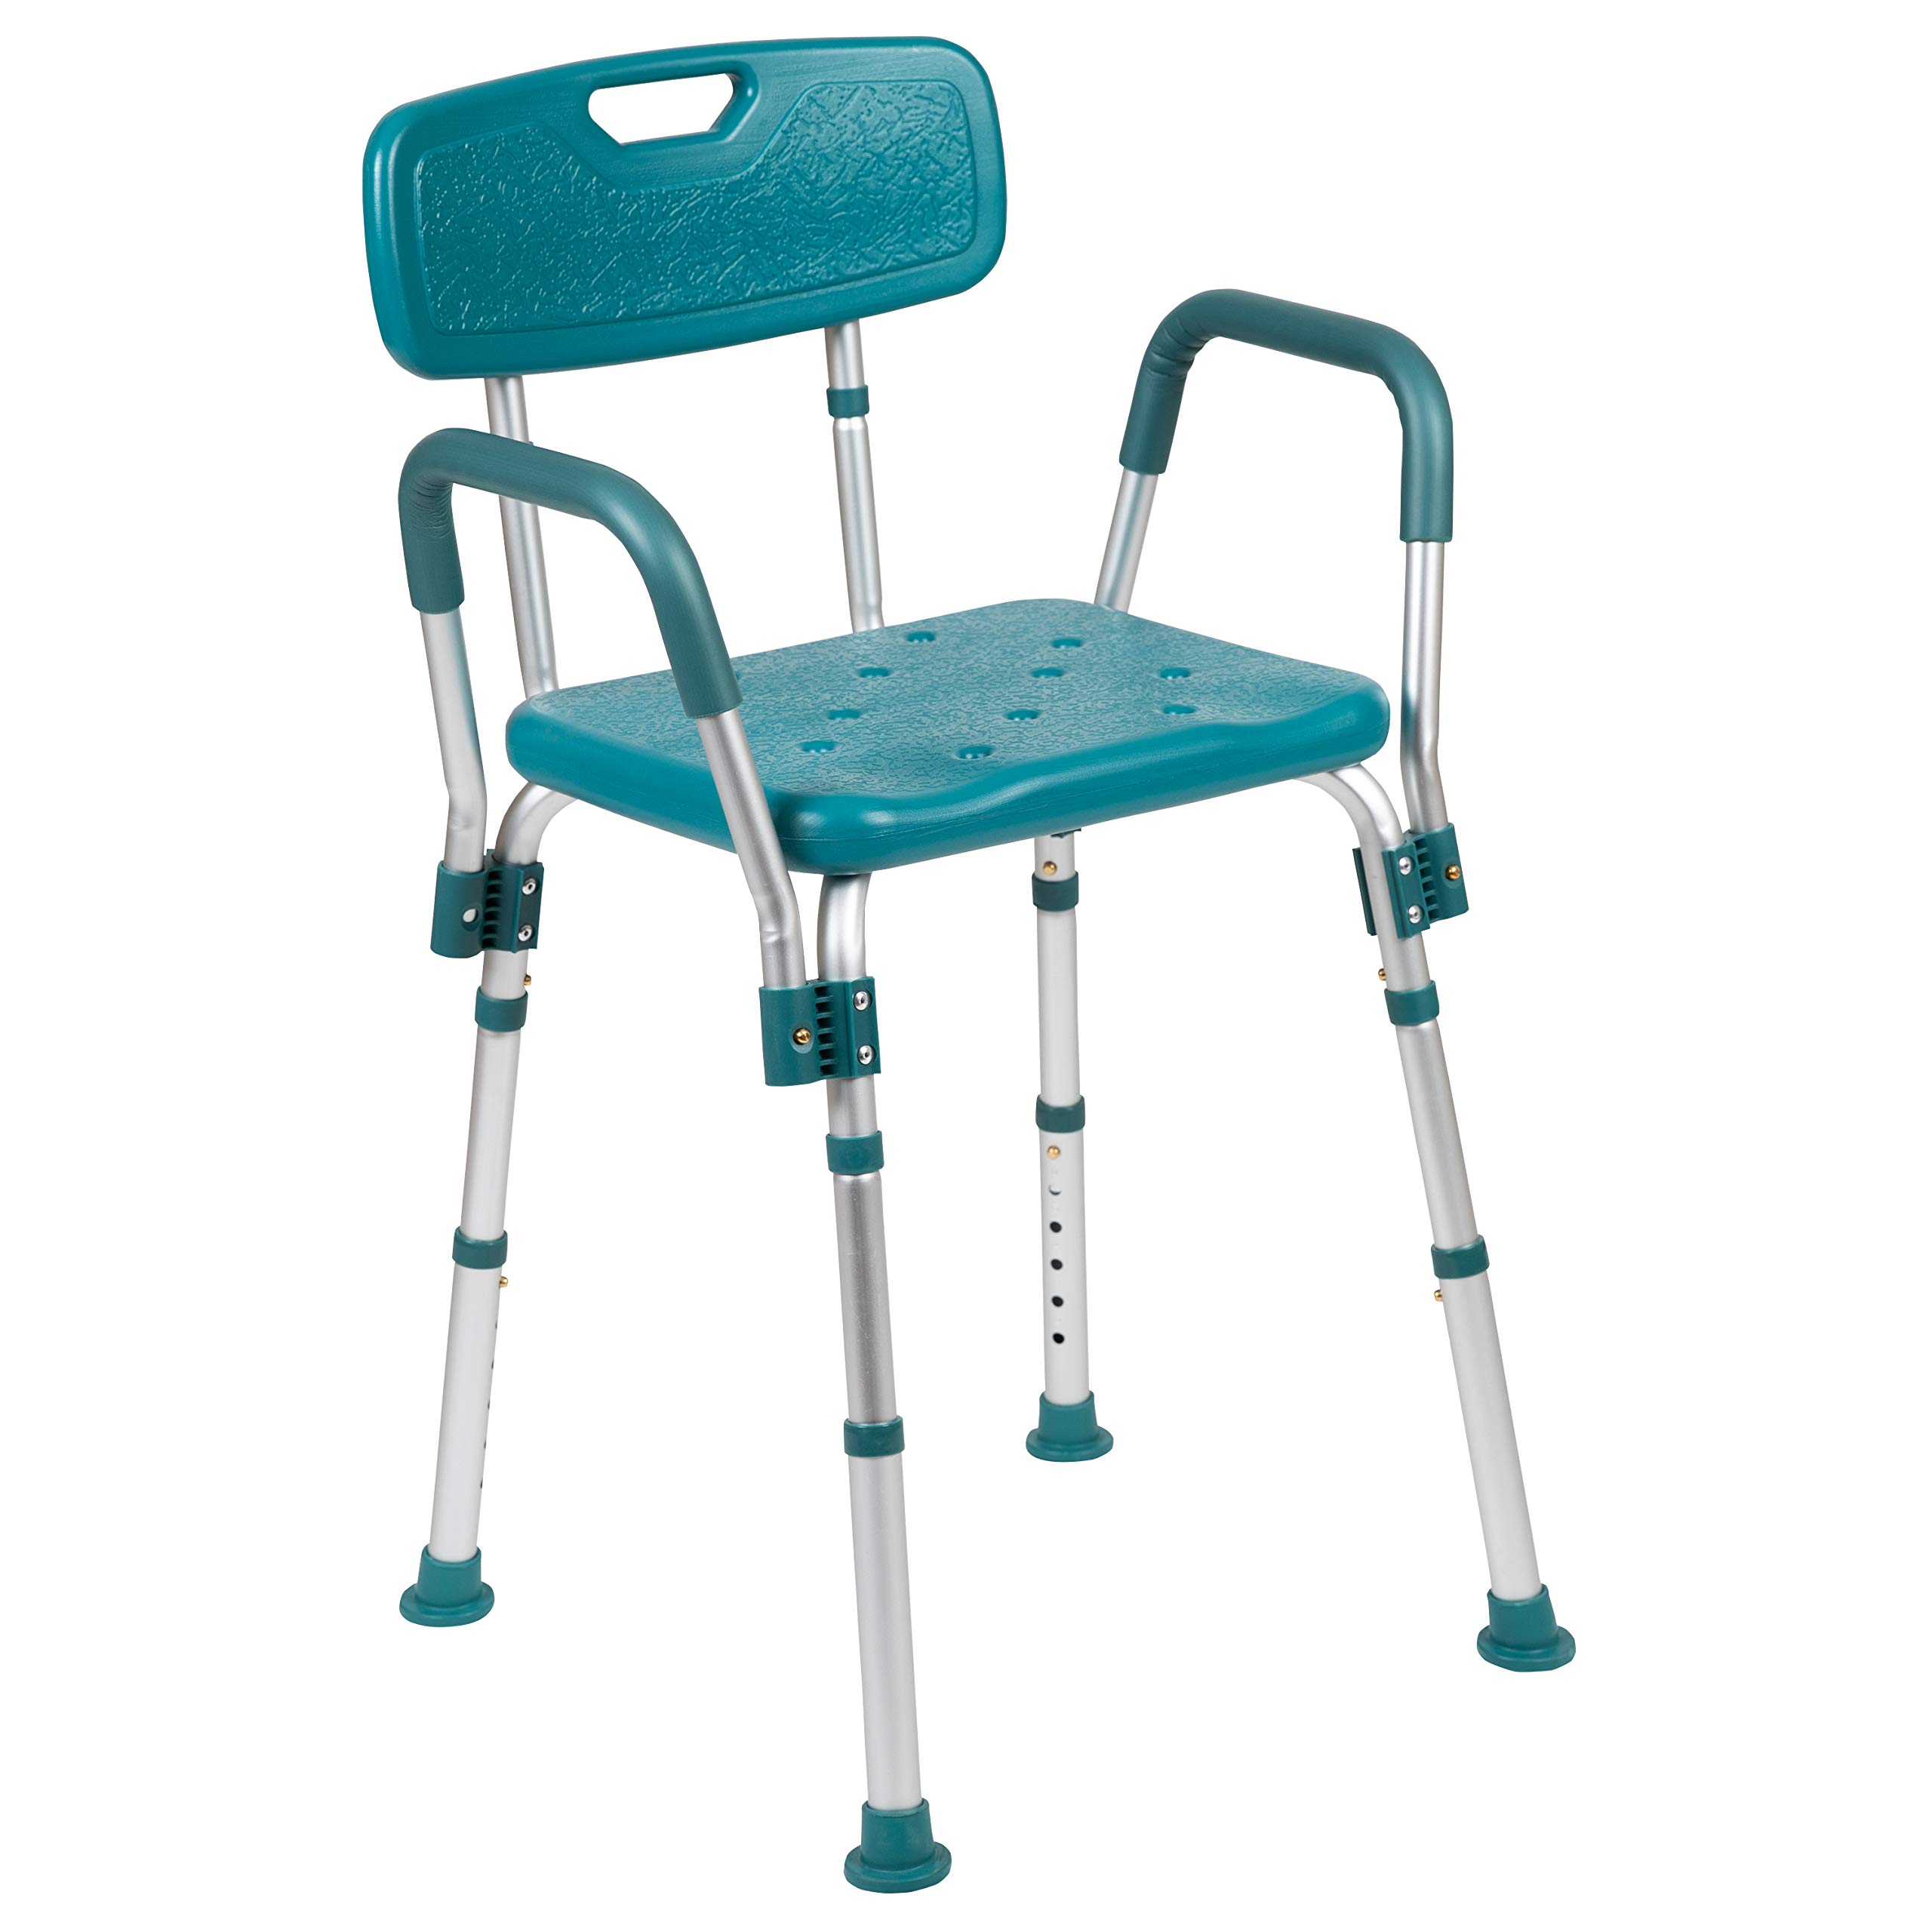 Flash Furniture HERCULES Series 300 Lb. Capacity Adjustable Teal Bath & Shower Chair with Quick Release Back & Arms